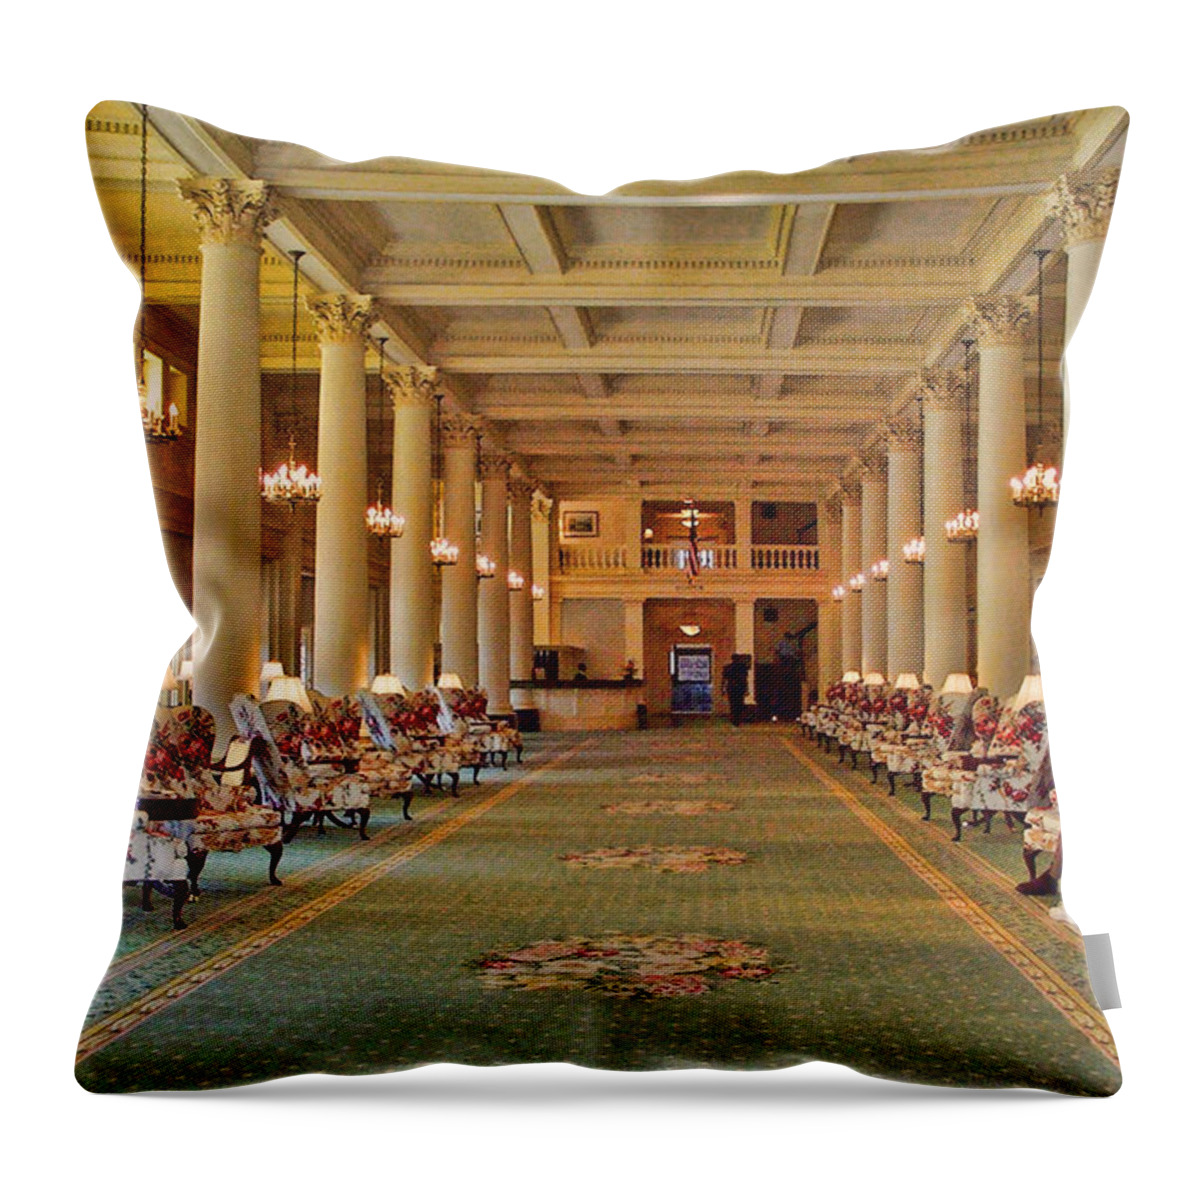 Wright Throw Pillow featuring the photograph Checkers In The Homestead Lobby by Paulette B Wright